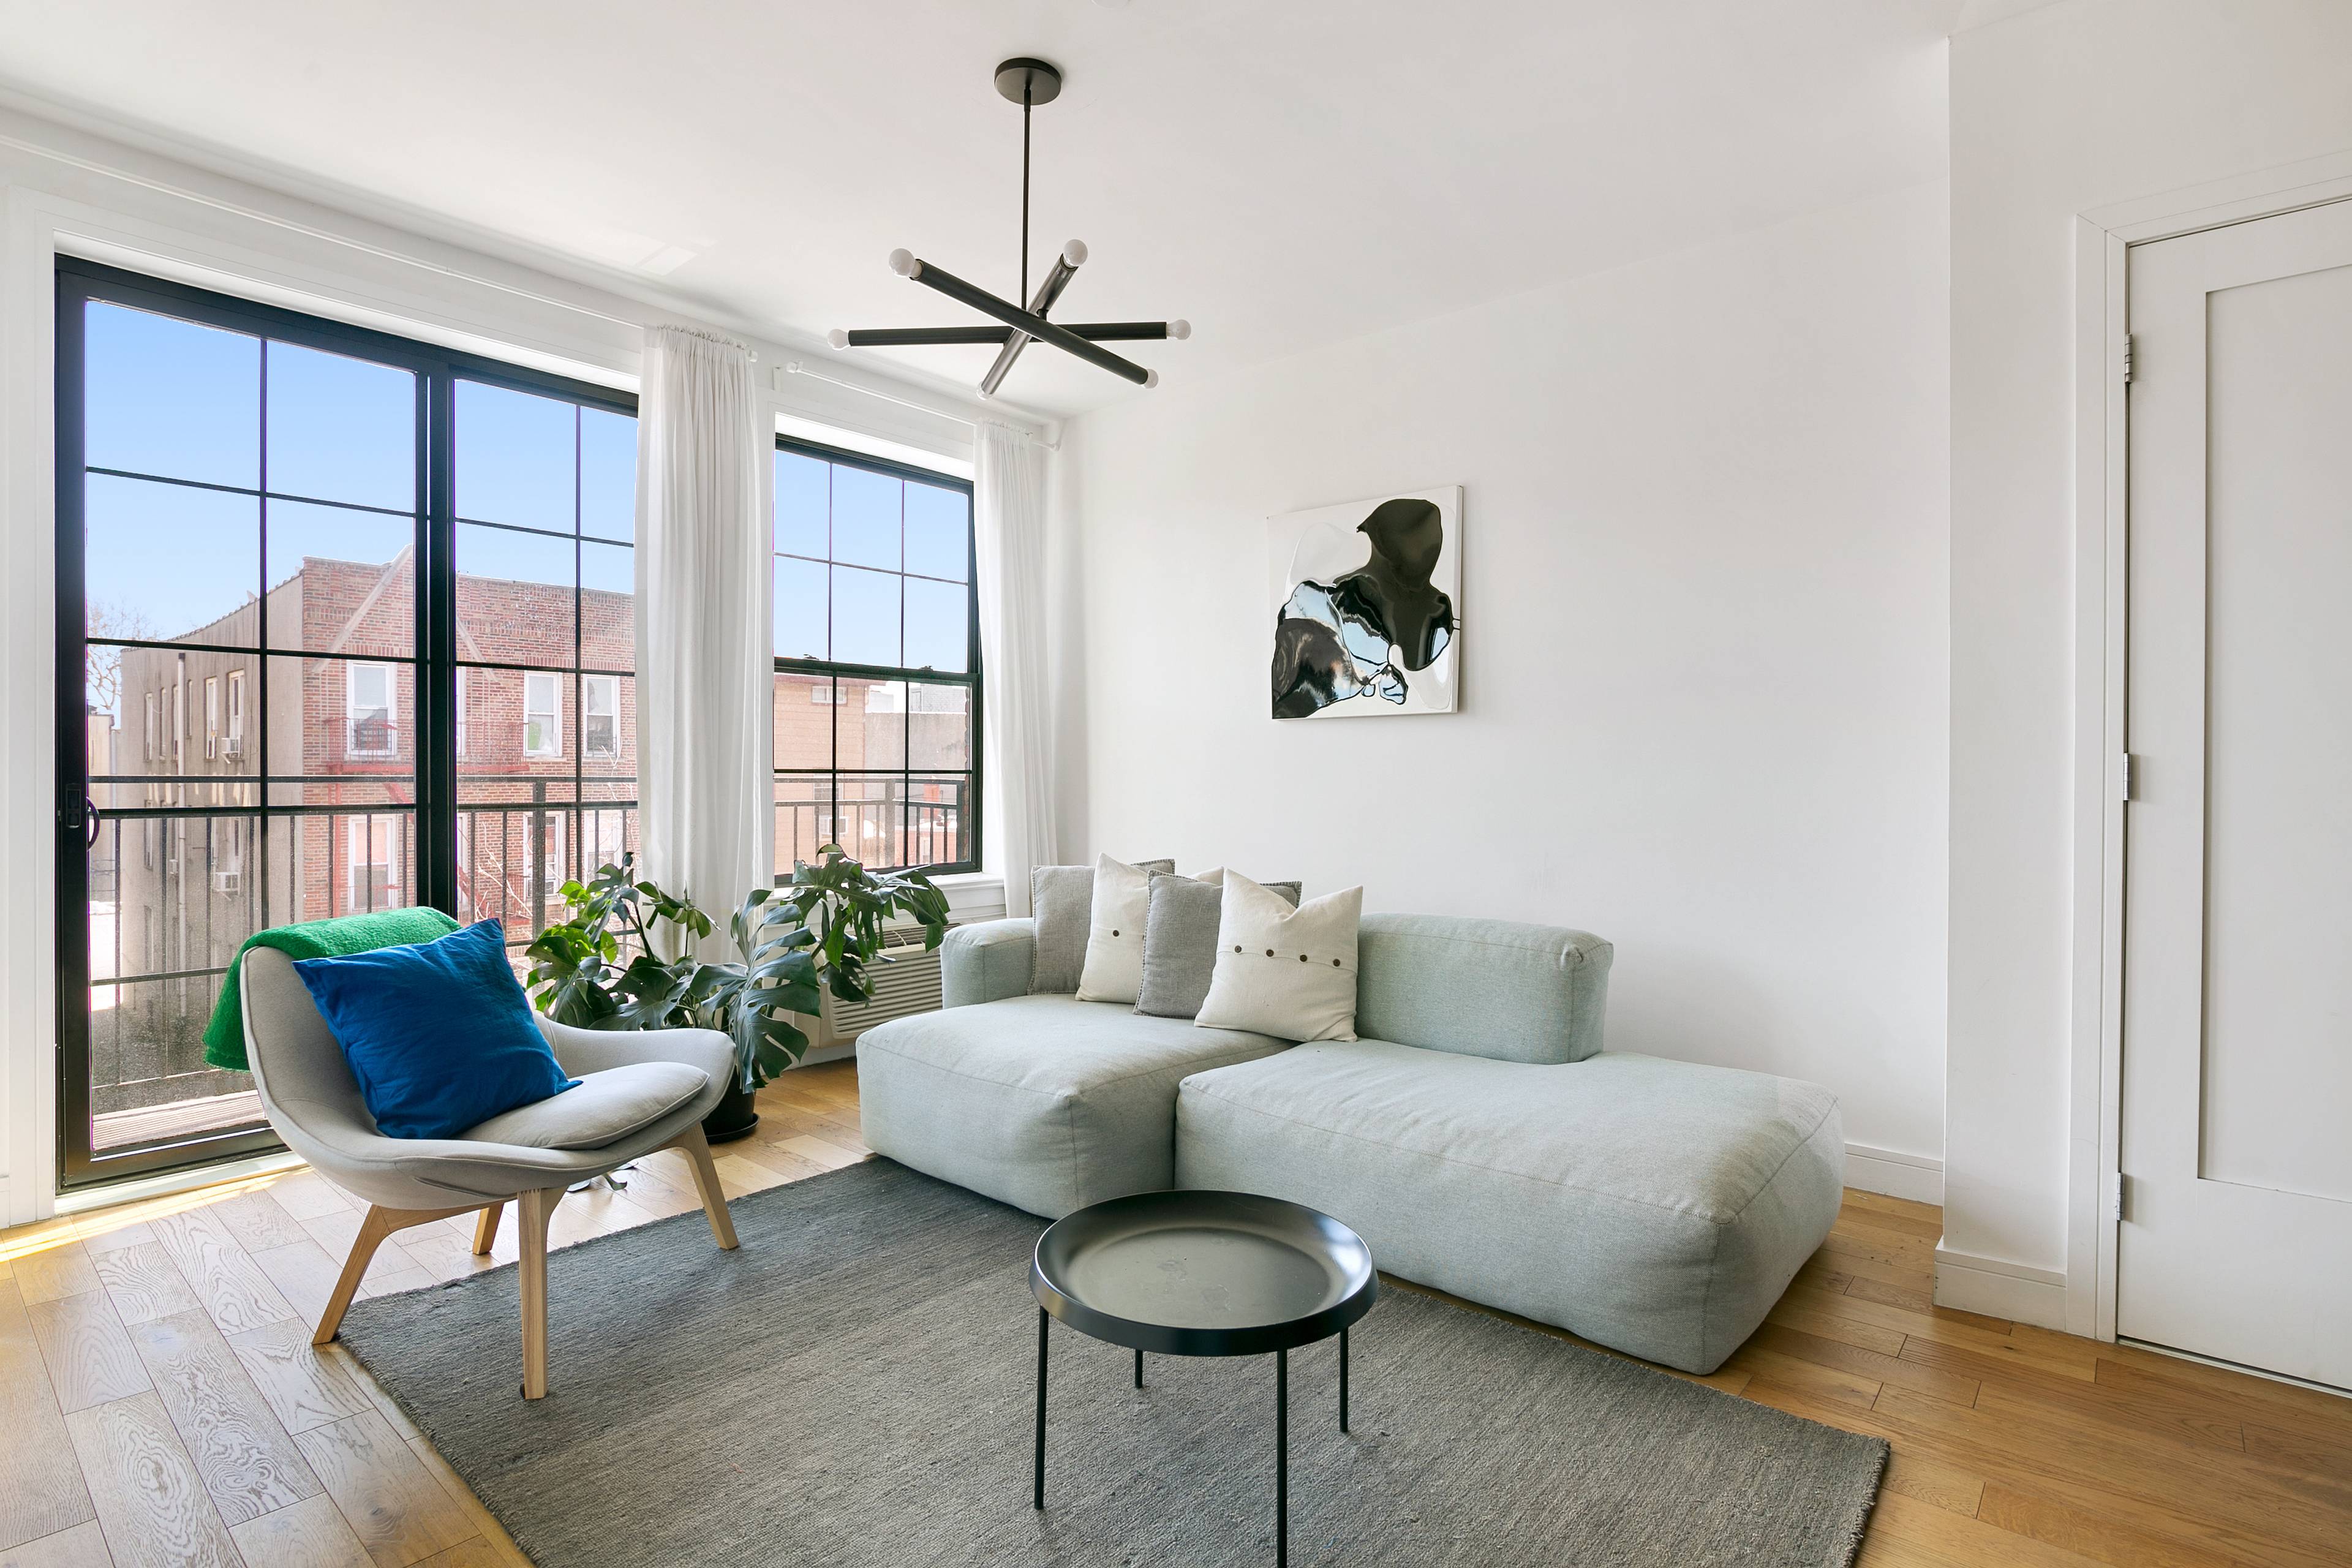 Upon entering this stunning apartment, you will be drawn to the oversize windows with South Eastern exposures that bathe the home with sunlight throughout the day.